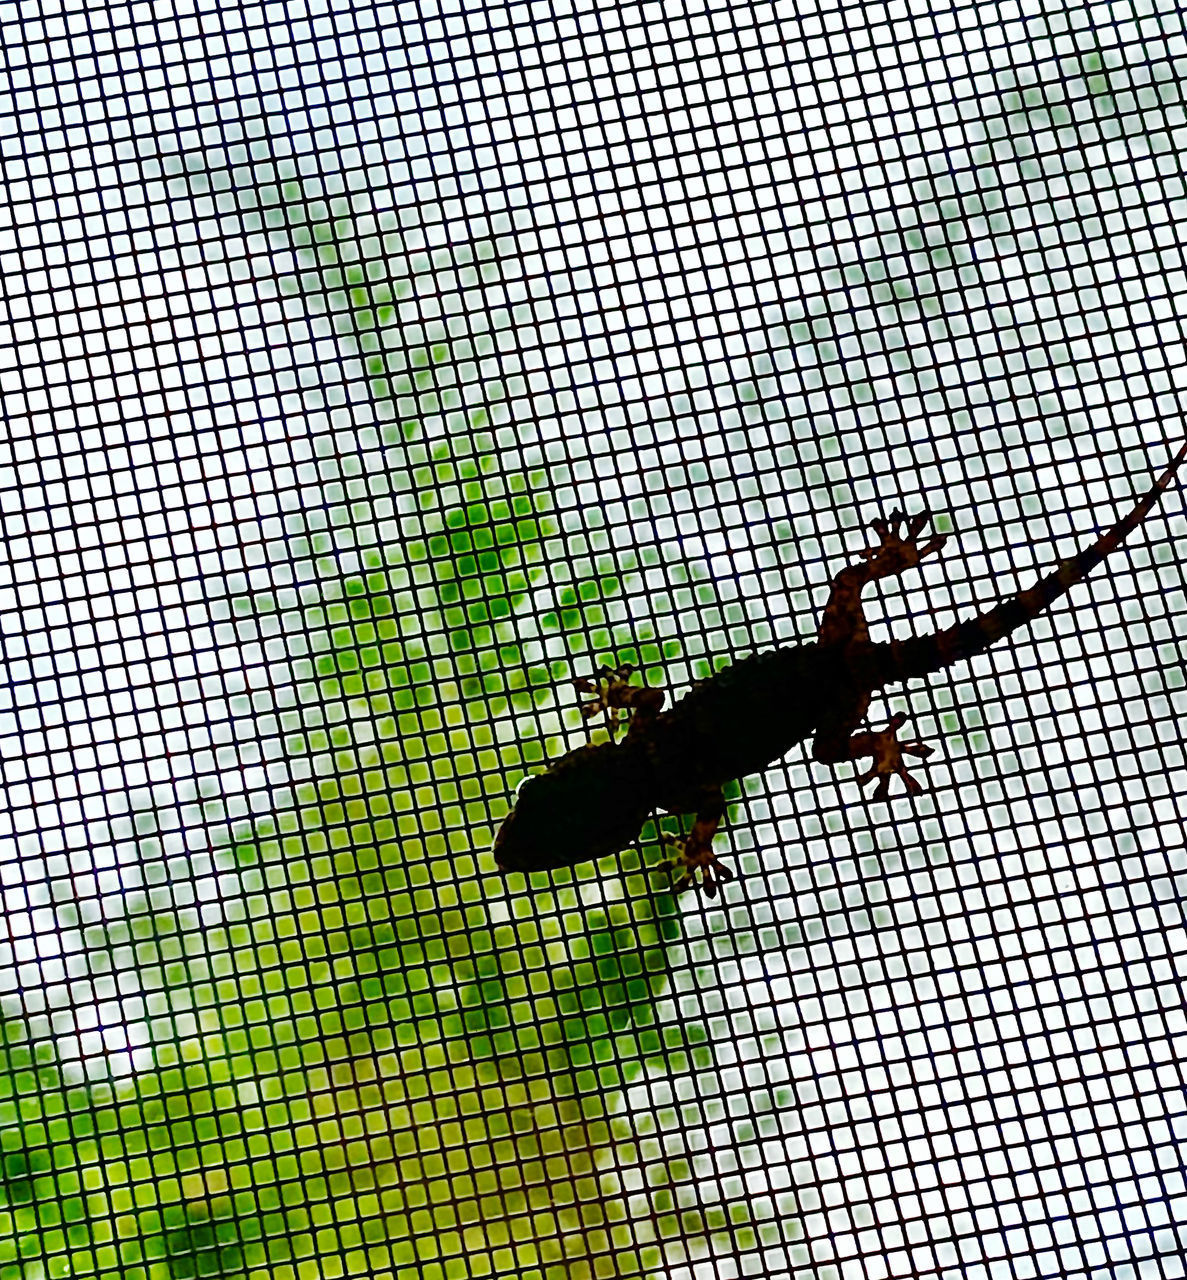 LOW ANGLE VIEW OF A LIZARD ON A SILHOUETTE